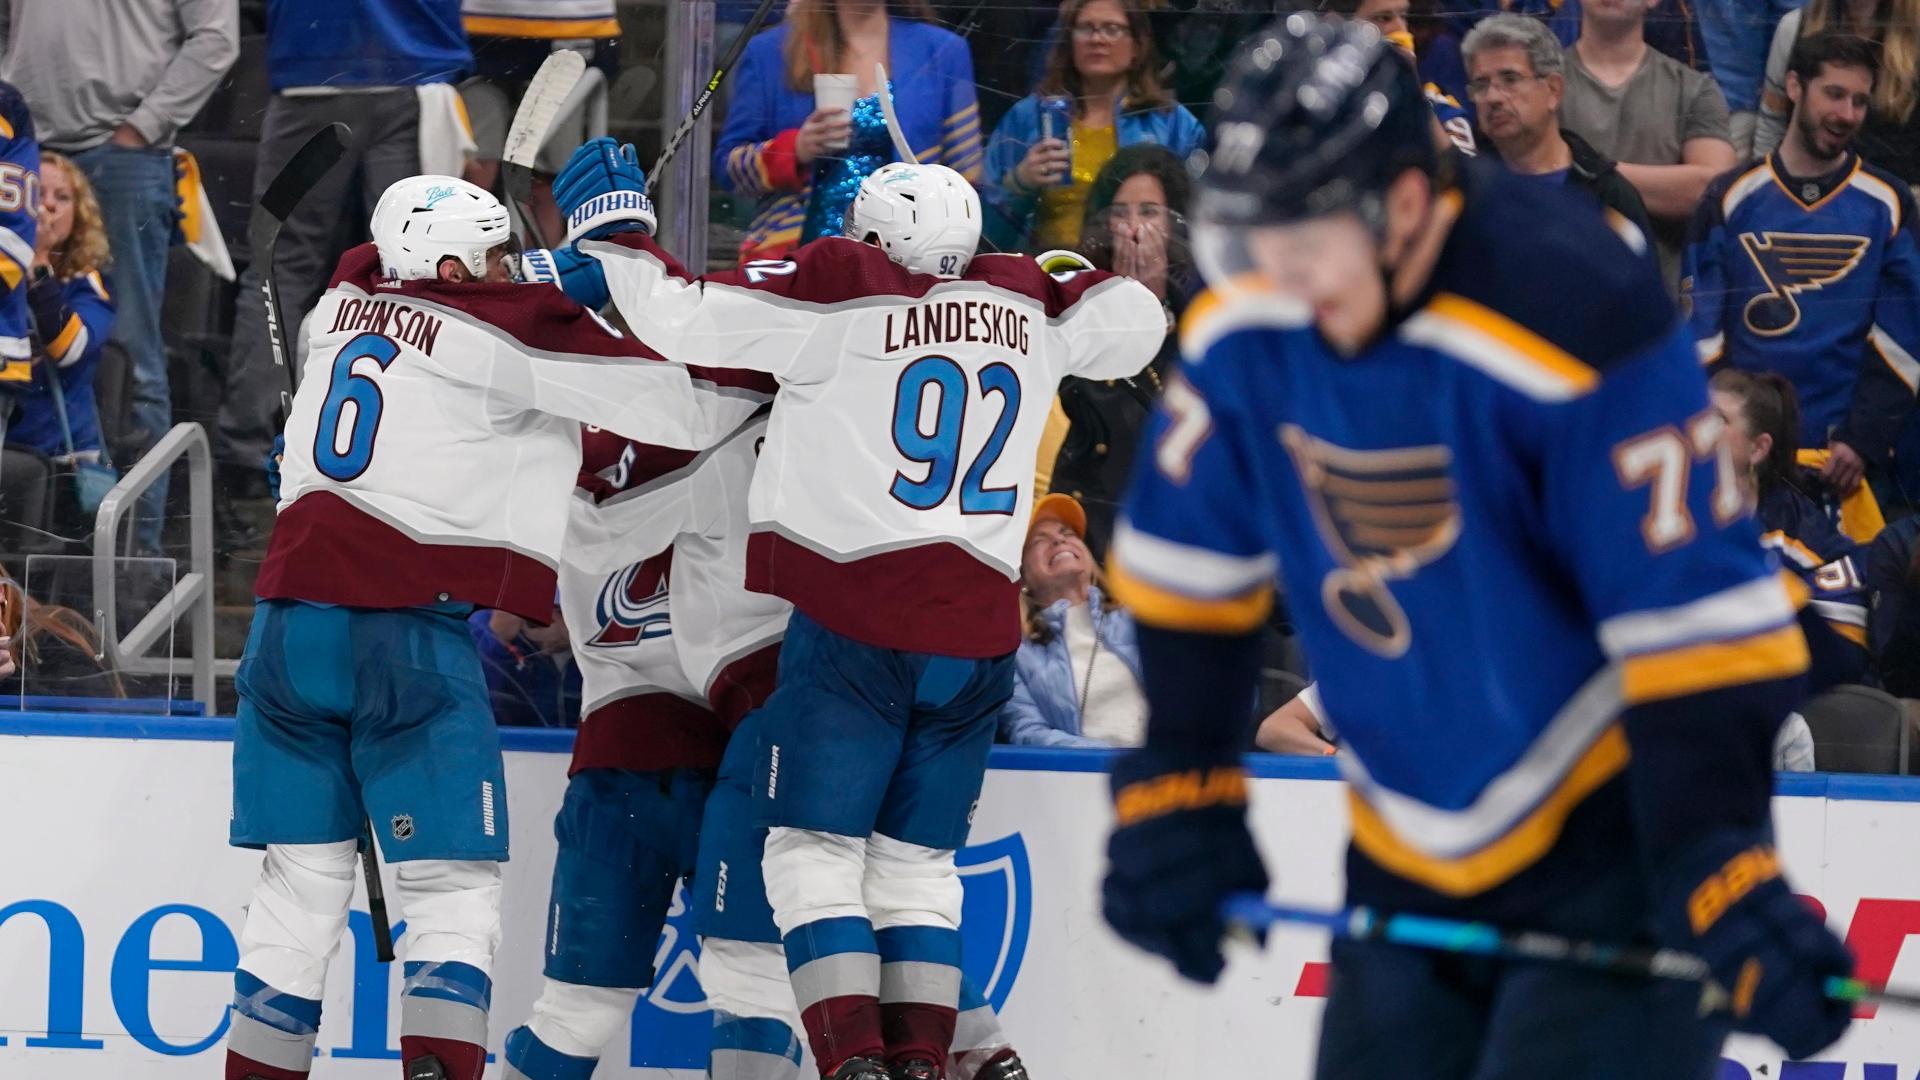 Avs win series with goal in final seconds